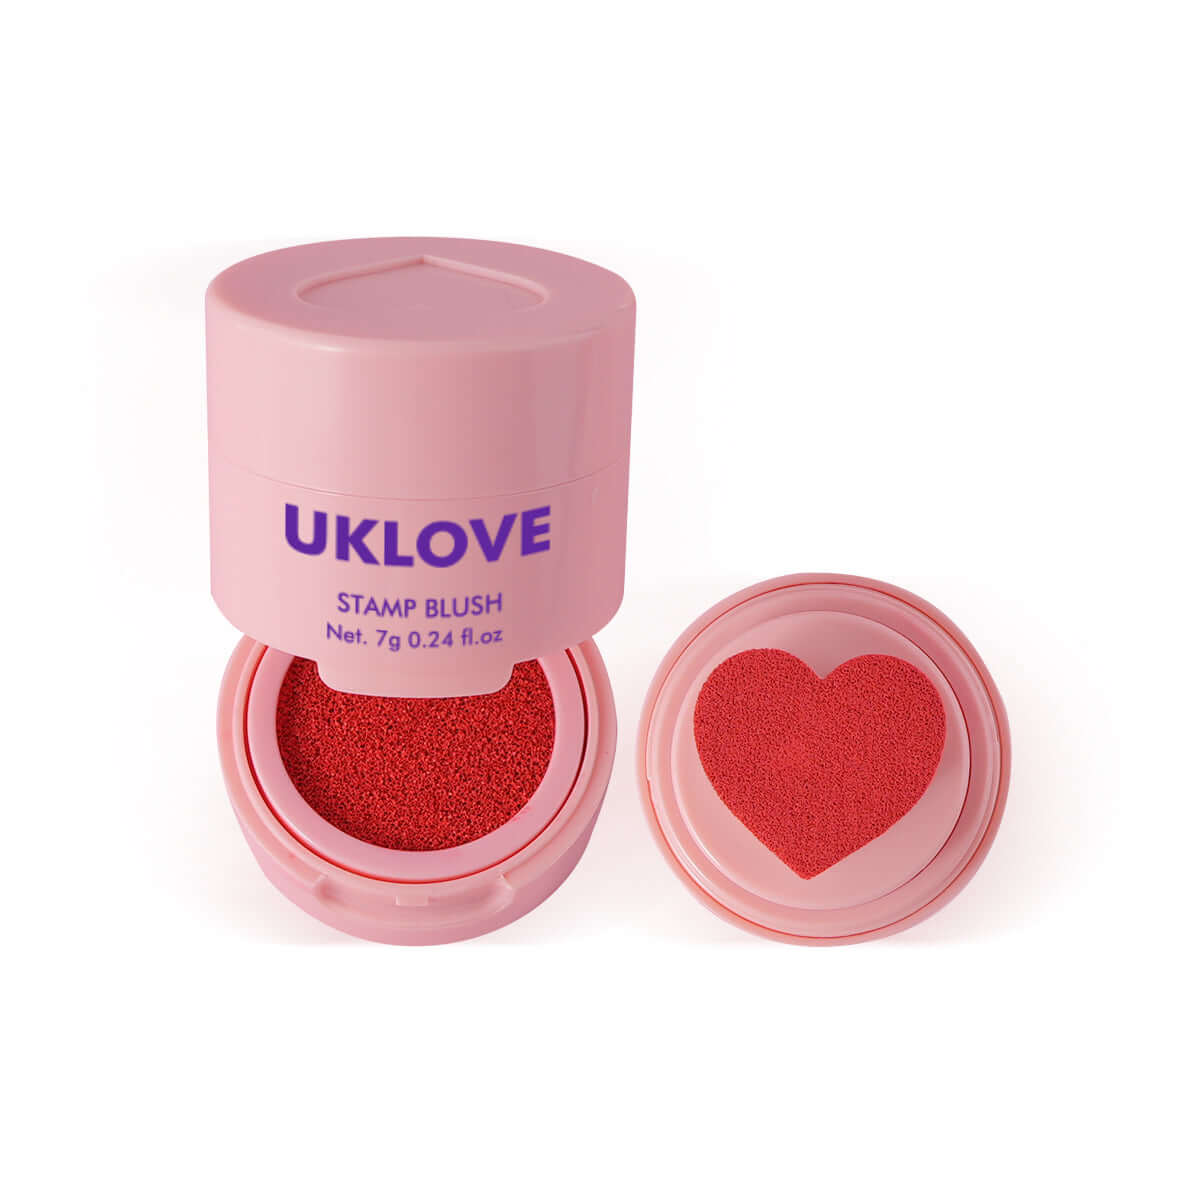 Discover Non Stop Black with UKLOVE Stamp Blush